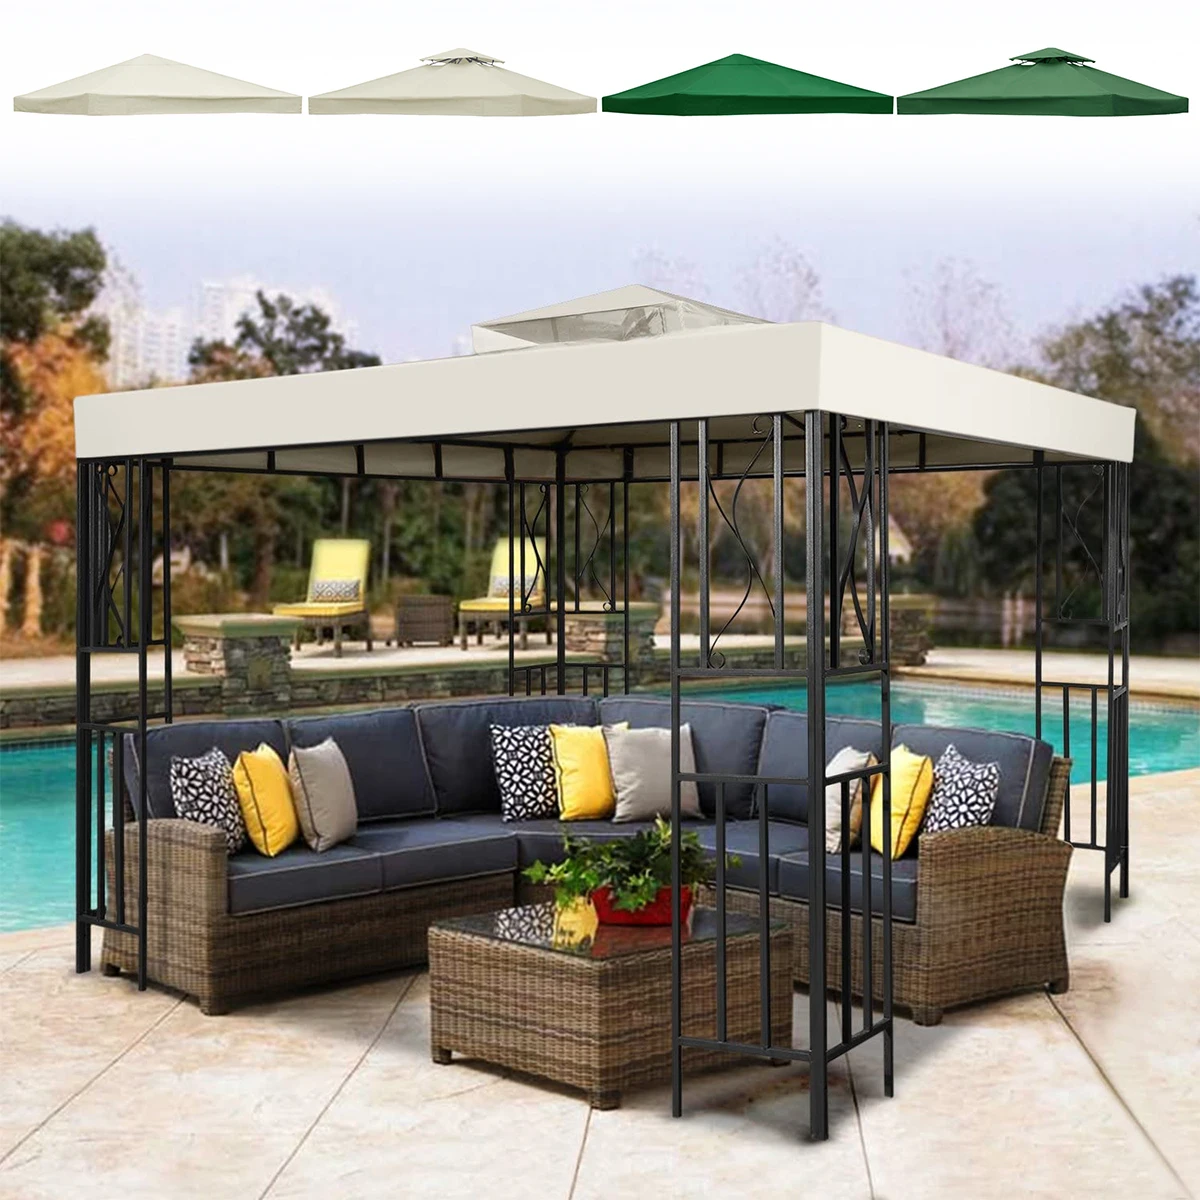 

Garden Gazebo Top Cover 3x3M Canopy Replacement Pavilion Roof 1/2 Tier Outdoor Patio Garden Tent Roof Top Durable Replacement